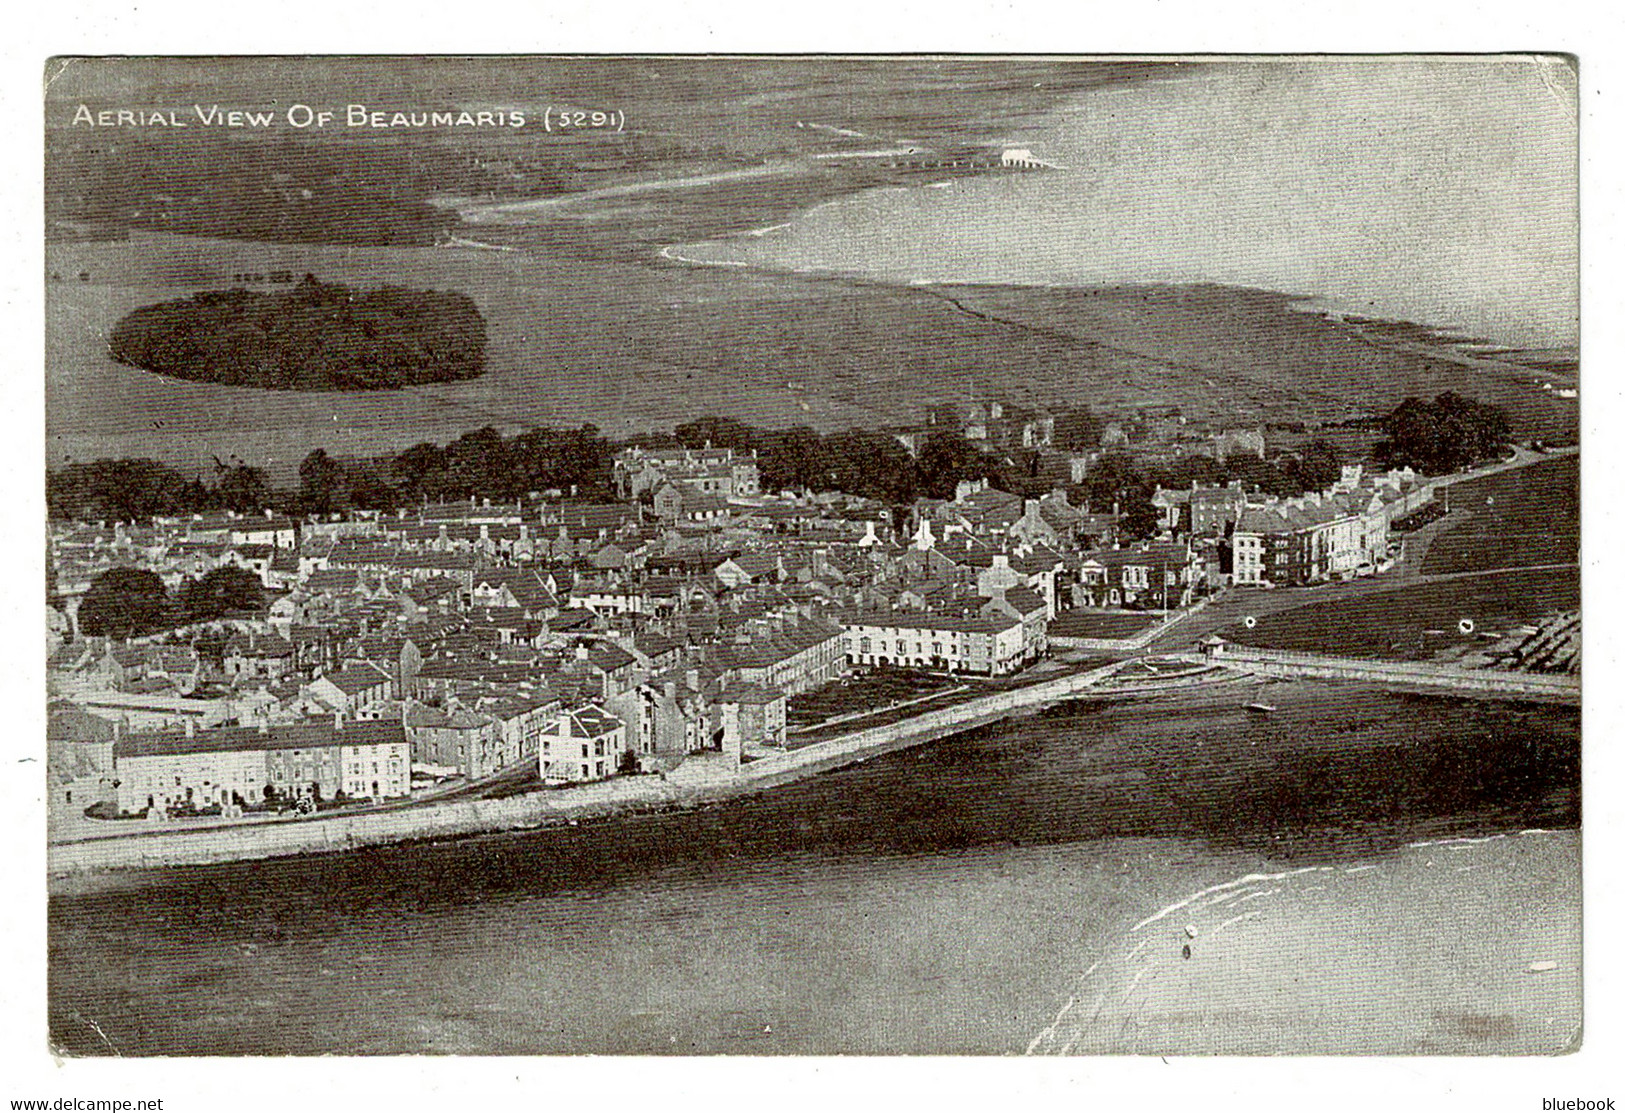 Ref 1416 - 1923 Postcard - Aerial View Of Beaumaris - Anglesey Wales  - Superb Beaumaris Postmark - Anglesey